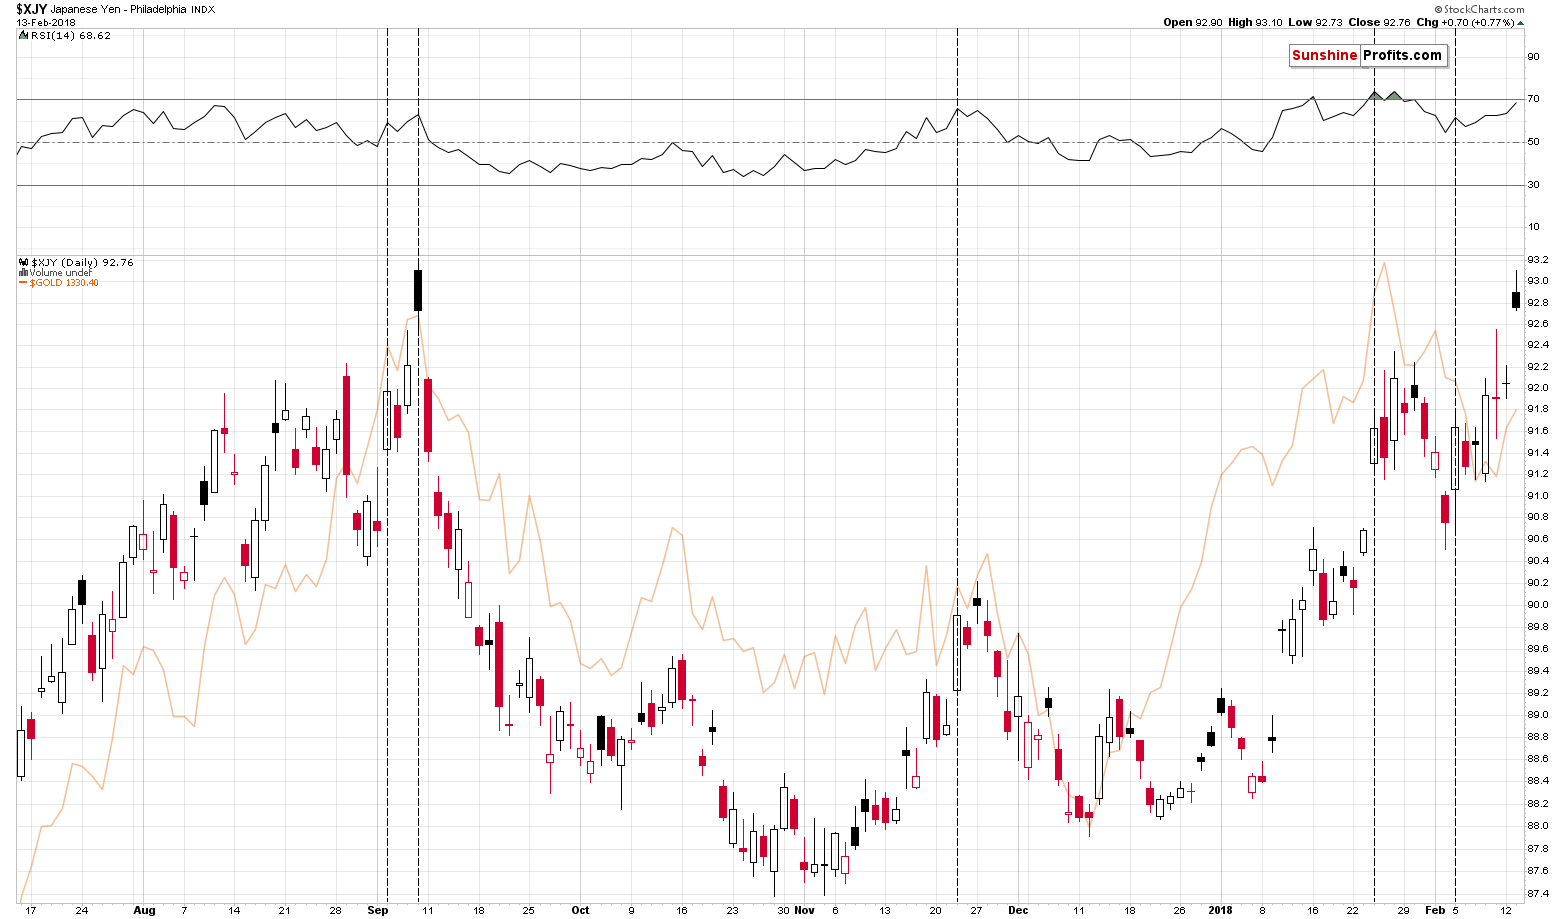 XJY - Japanese Yen and Gold